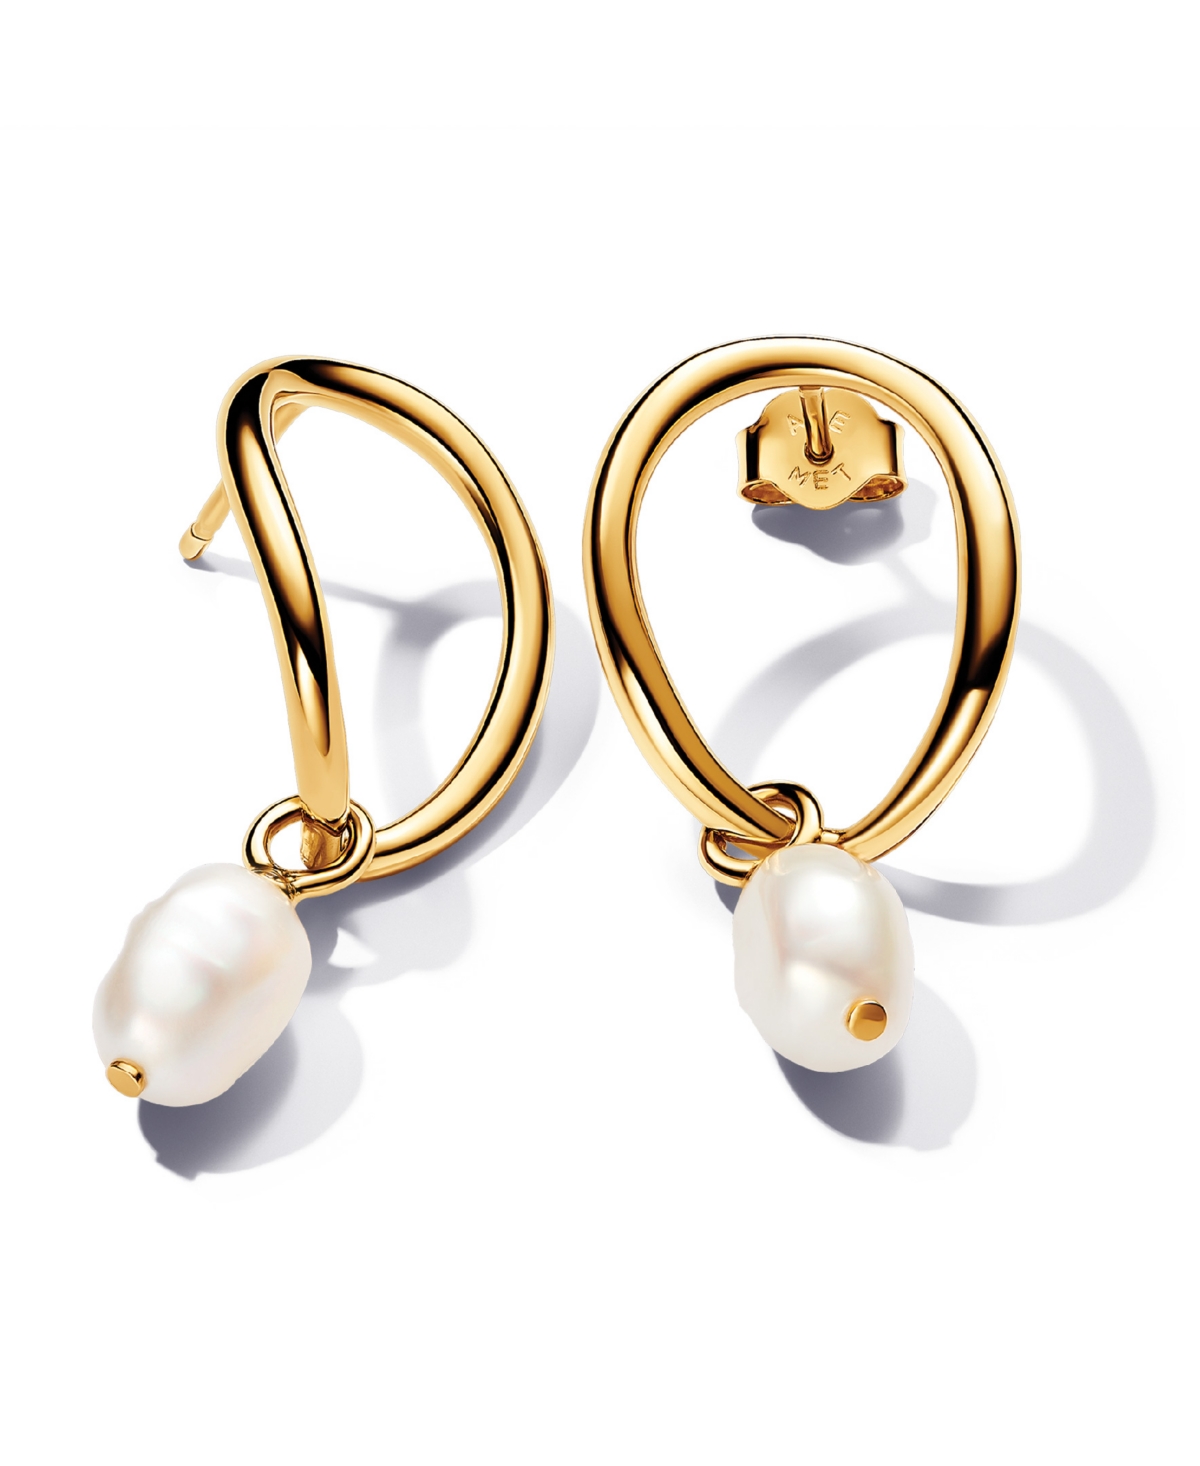 14K Gold-Plated Shaped Circle Baroque Treated Freshwater Cultured Pearl Earrings